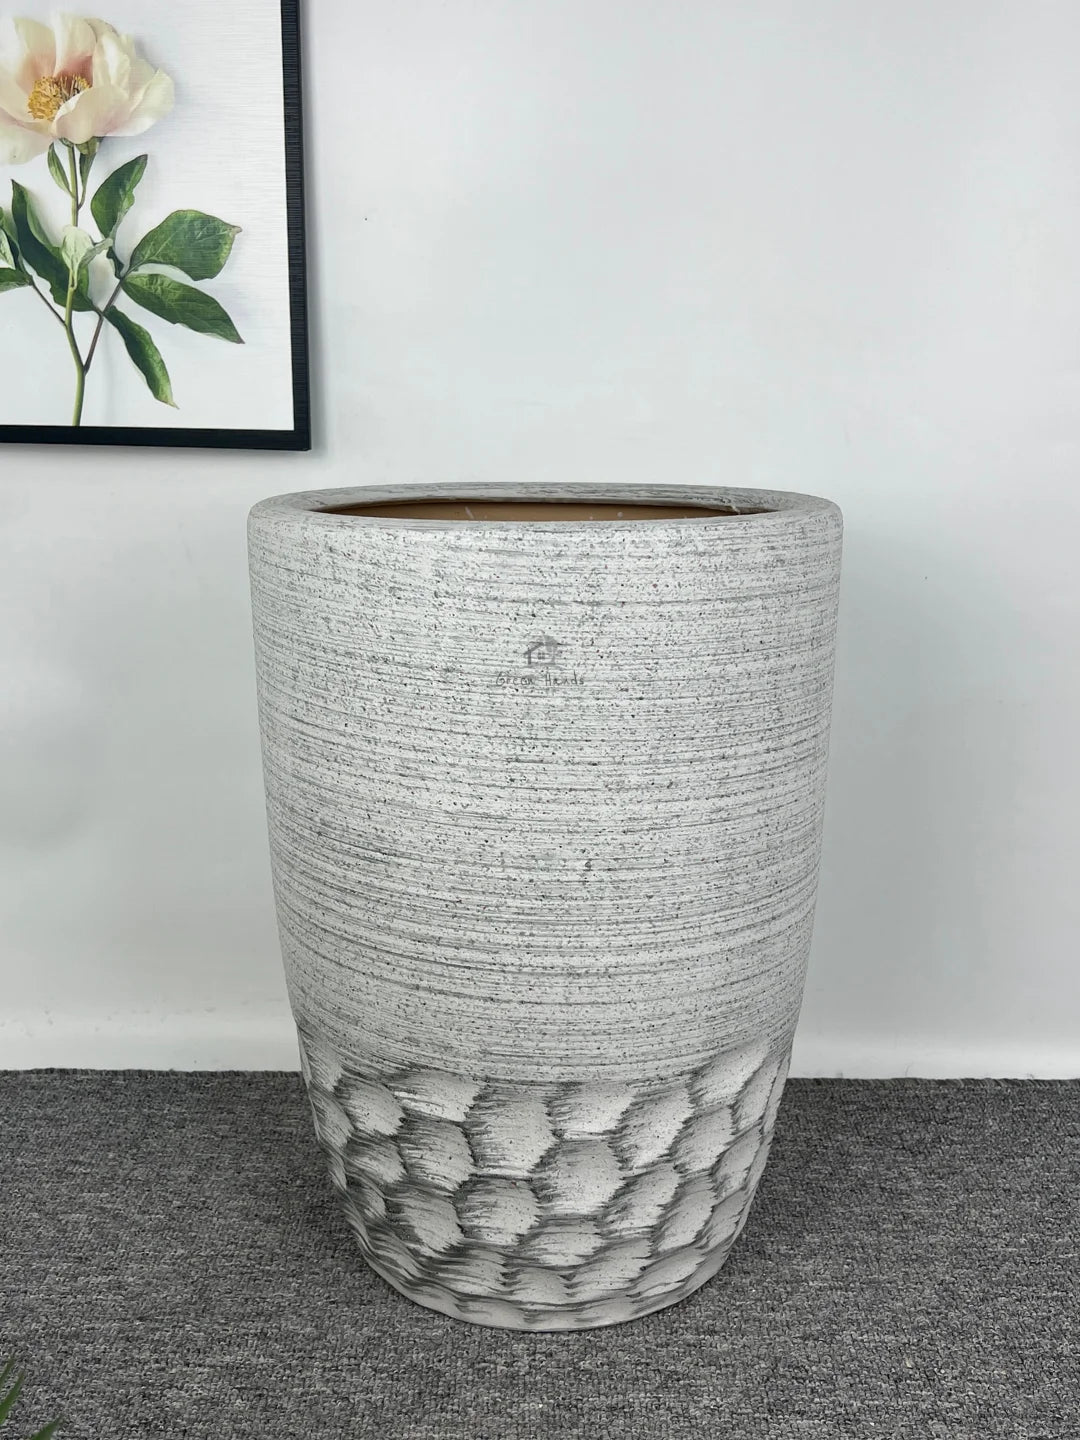 Modern Tall Ceramic Grey Honey Comb Pots: Elegance and Functionality Combined L